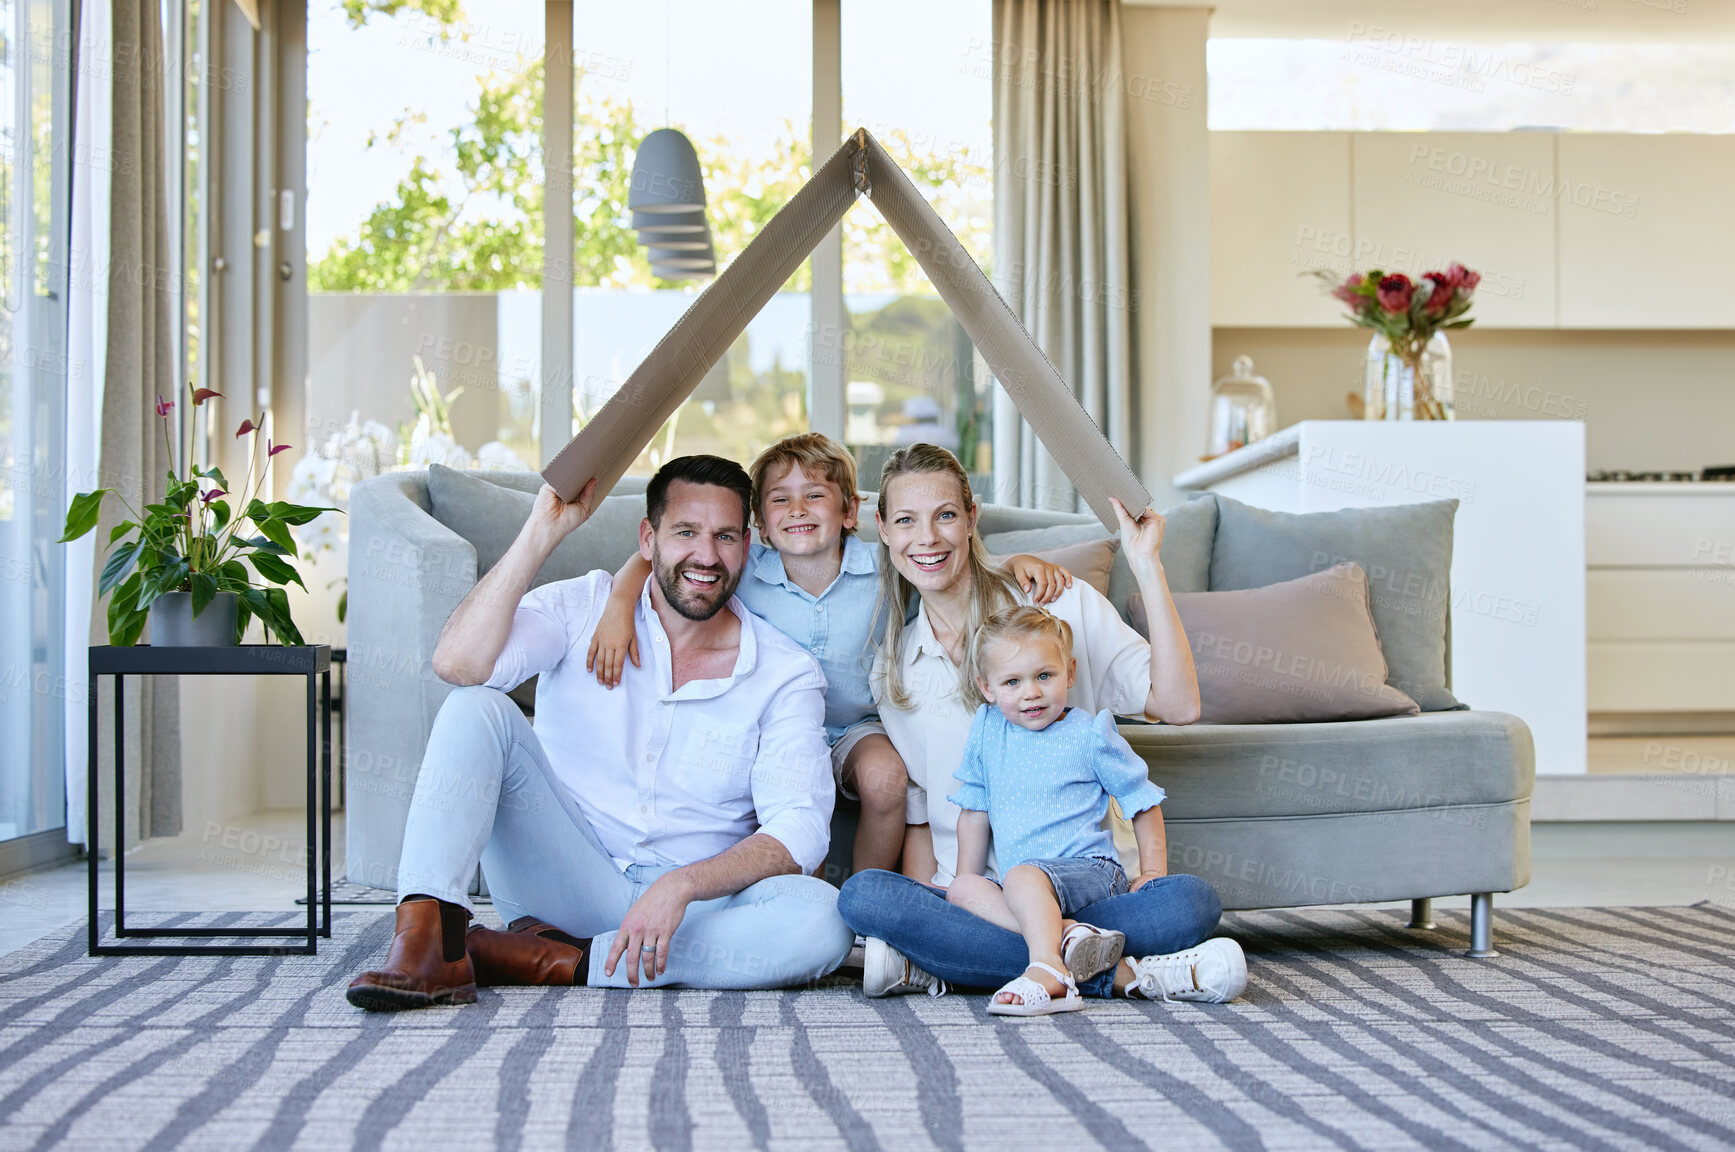 Buy stock photo Full length portrait of an affectionate family of four holding a cardboard roof over their heads while sitting in the living room at home